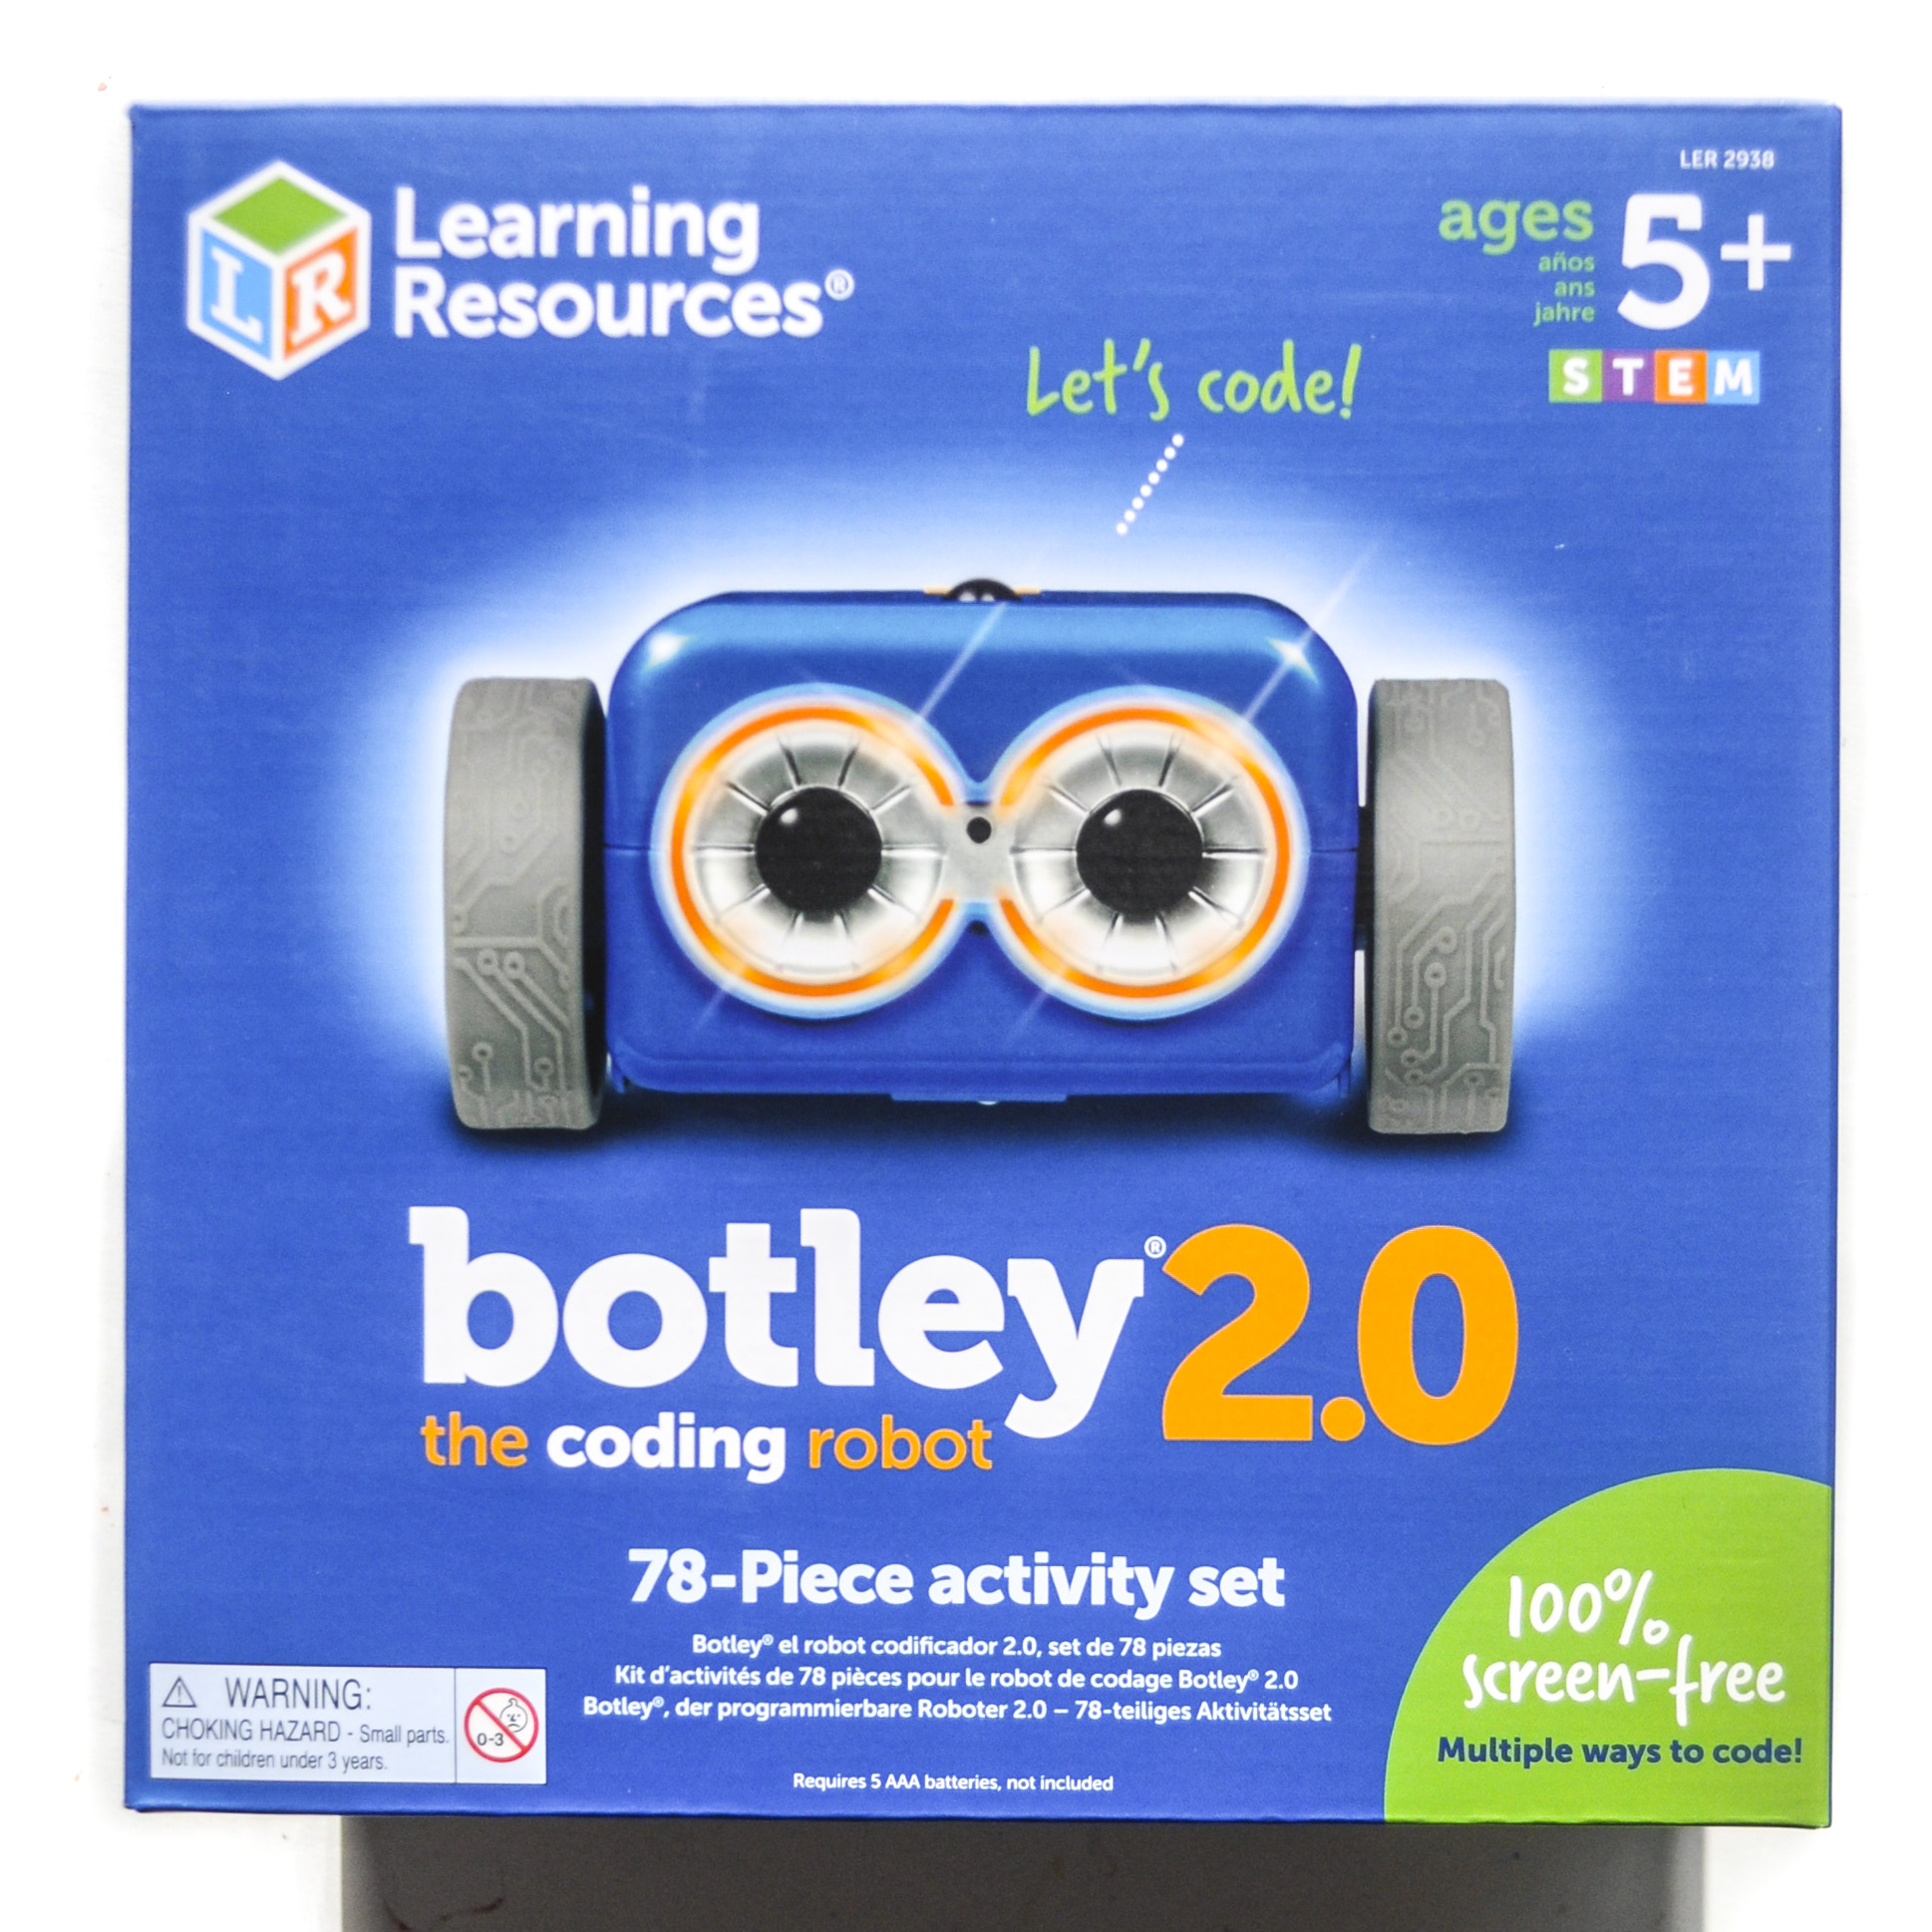 Learning Resources Botley The Coding Robot Facemask, Light Blue